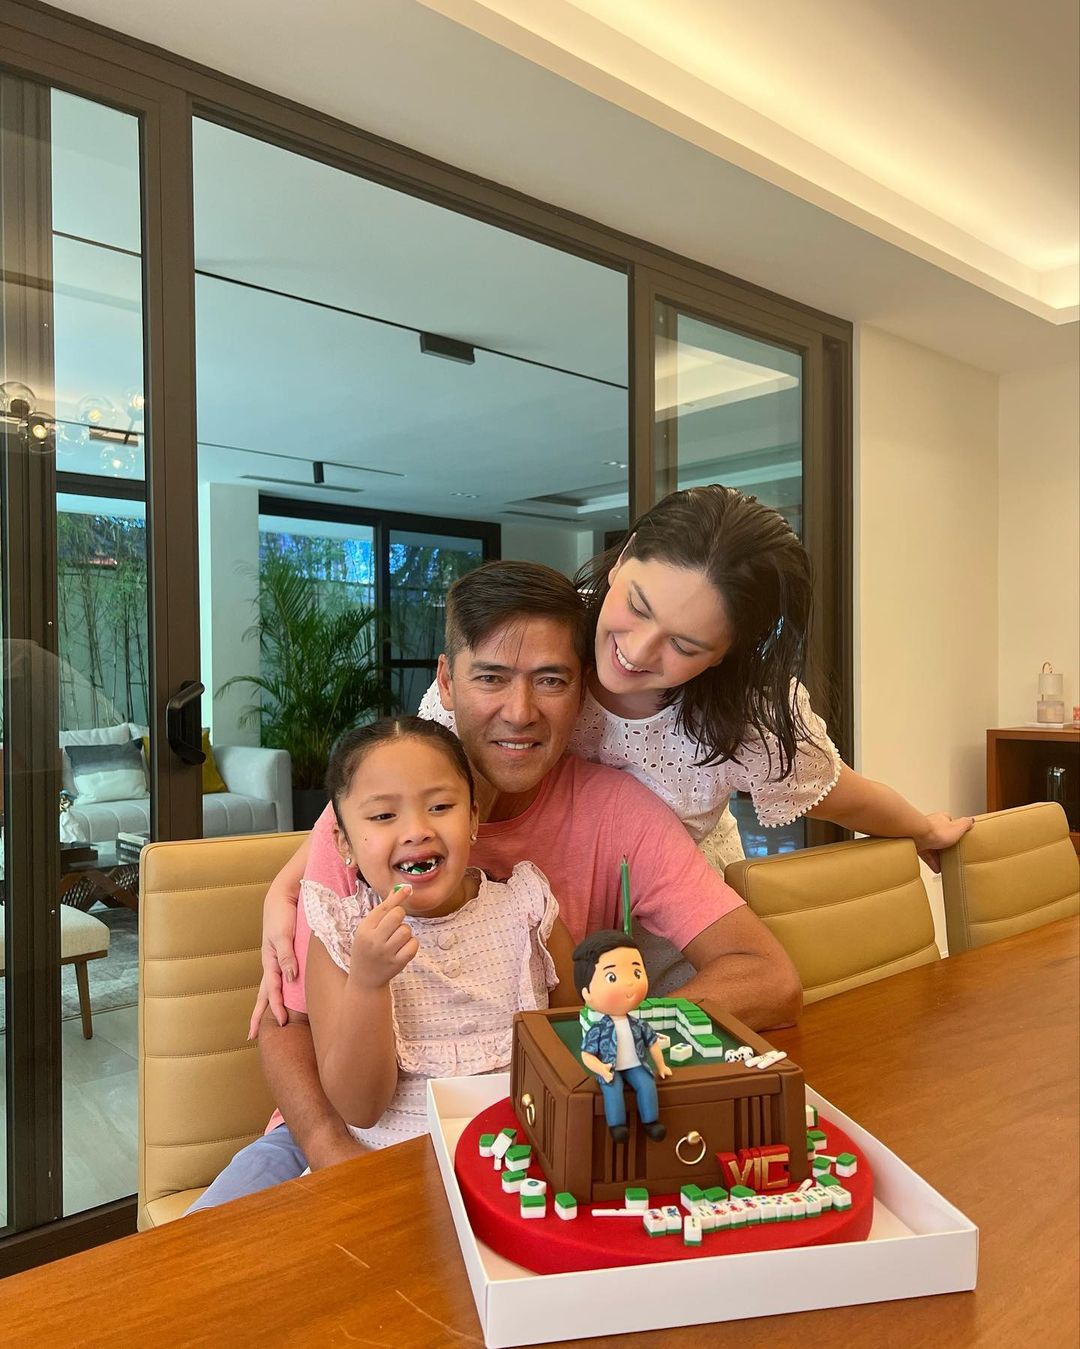 daniel ulvinen recommends pauleen and vic sotto pic